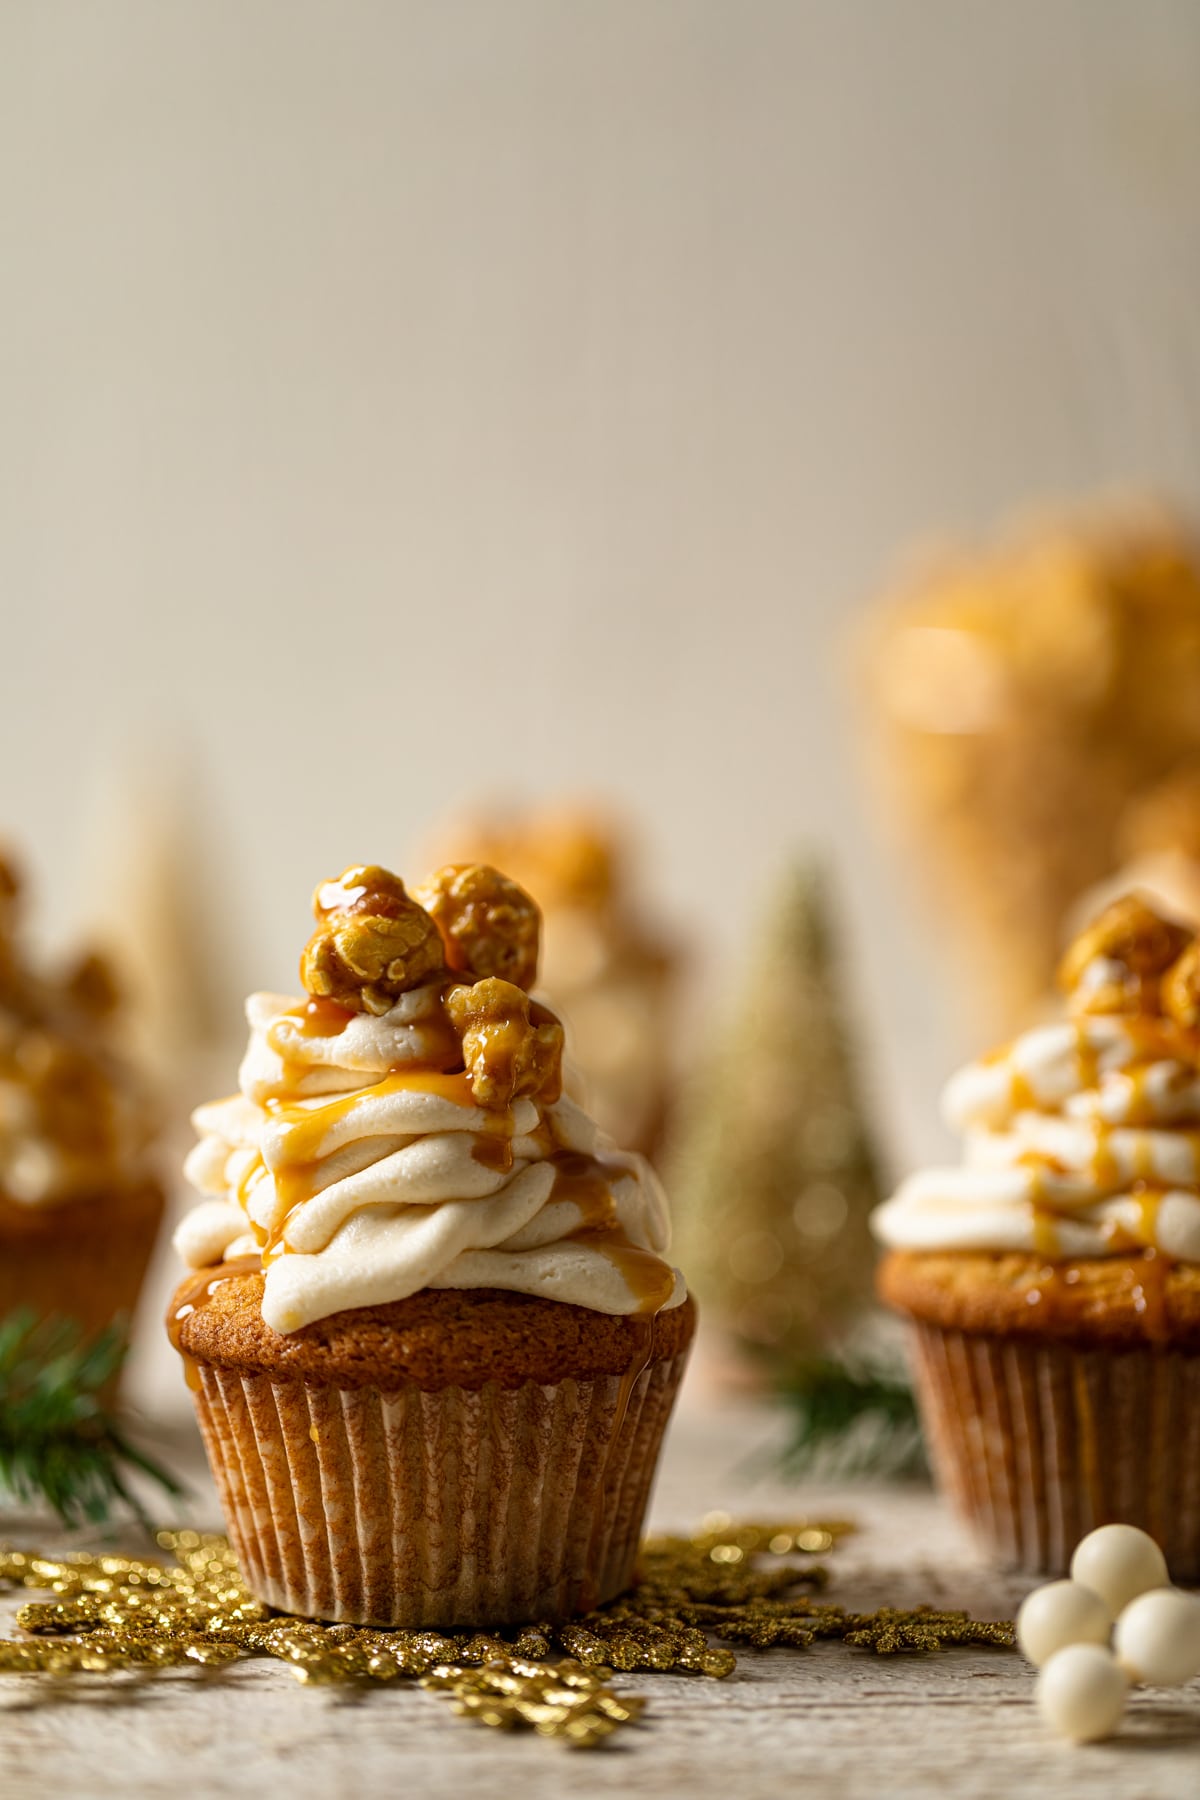 Caramel Eggnog Cupcake topped with caramel popcorn and caramel drizzle and on a golden snowflake decoration